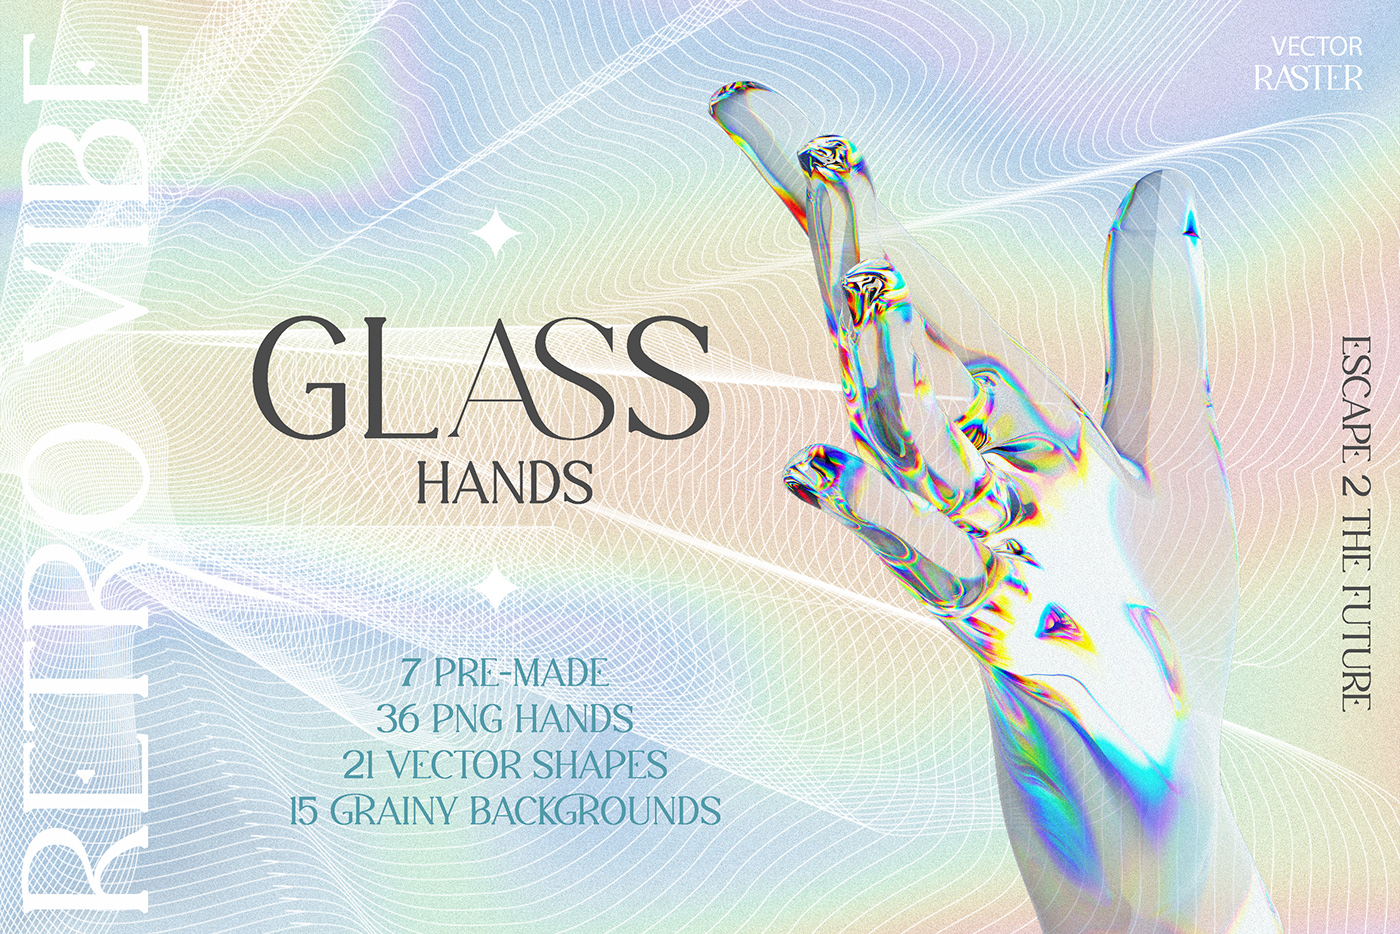 3d glass hand with dispersion effect in retro futuristic style